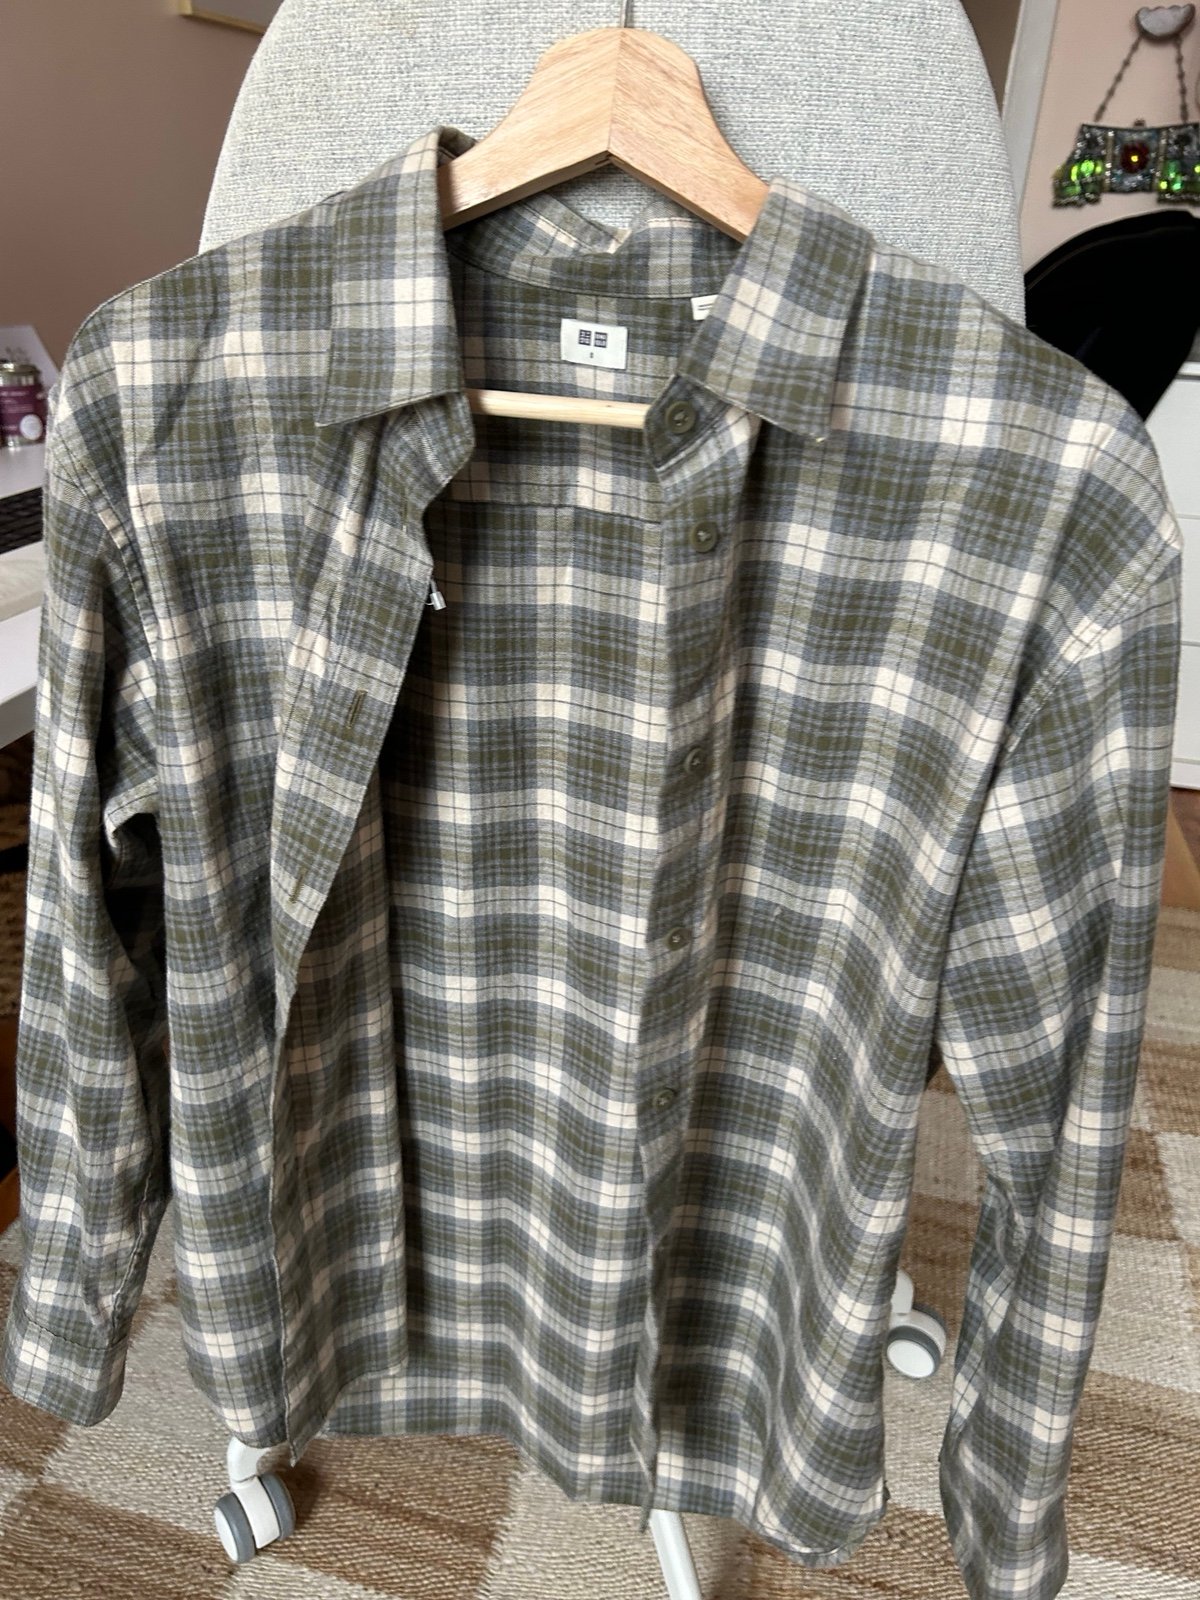 High quality Uniqlo plaid lightweight flannel button up